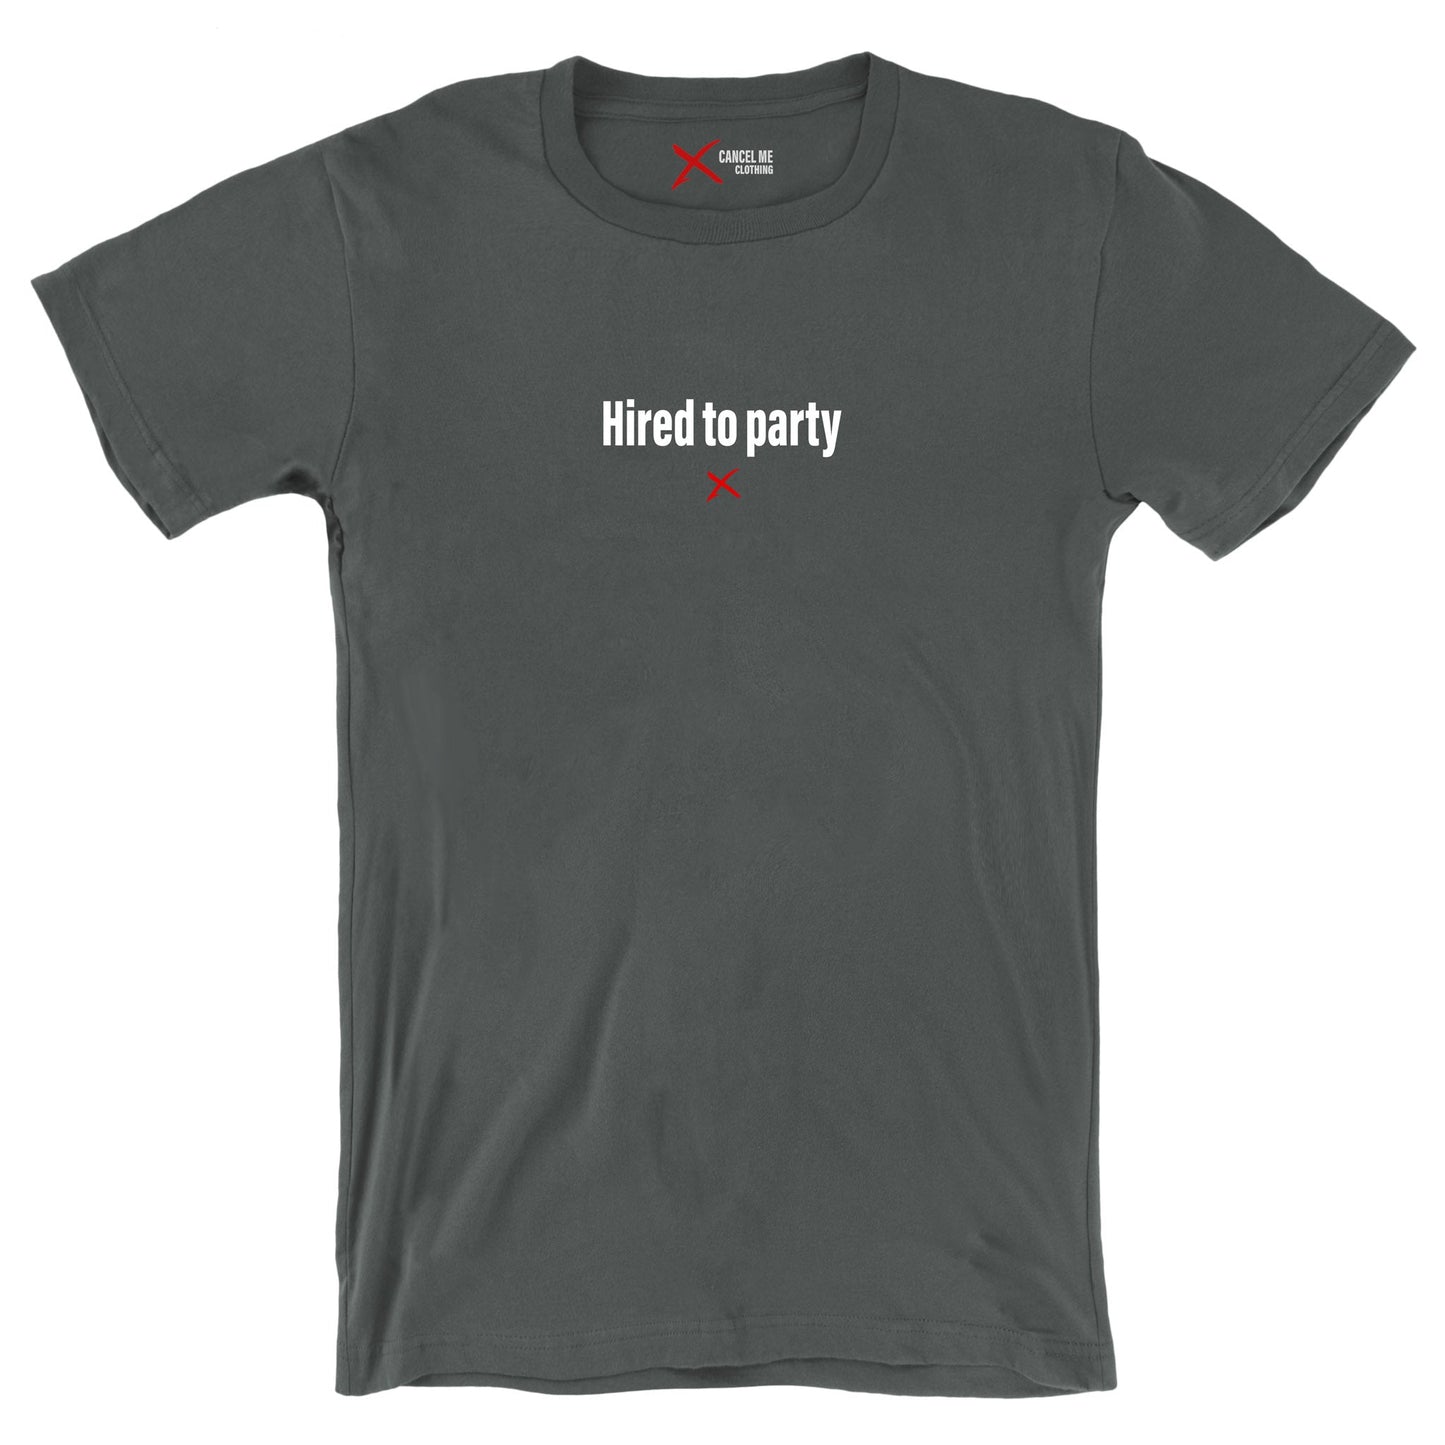 Hired to party - Shirt